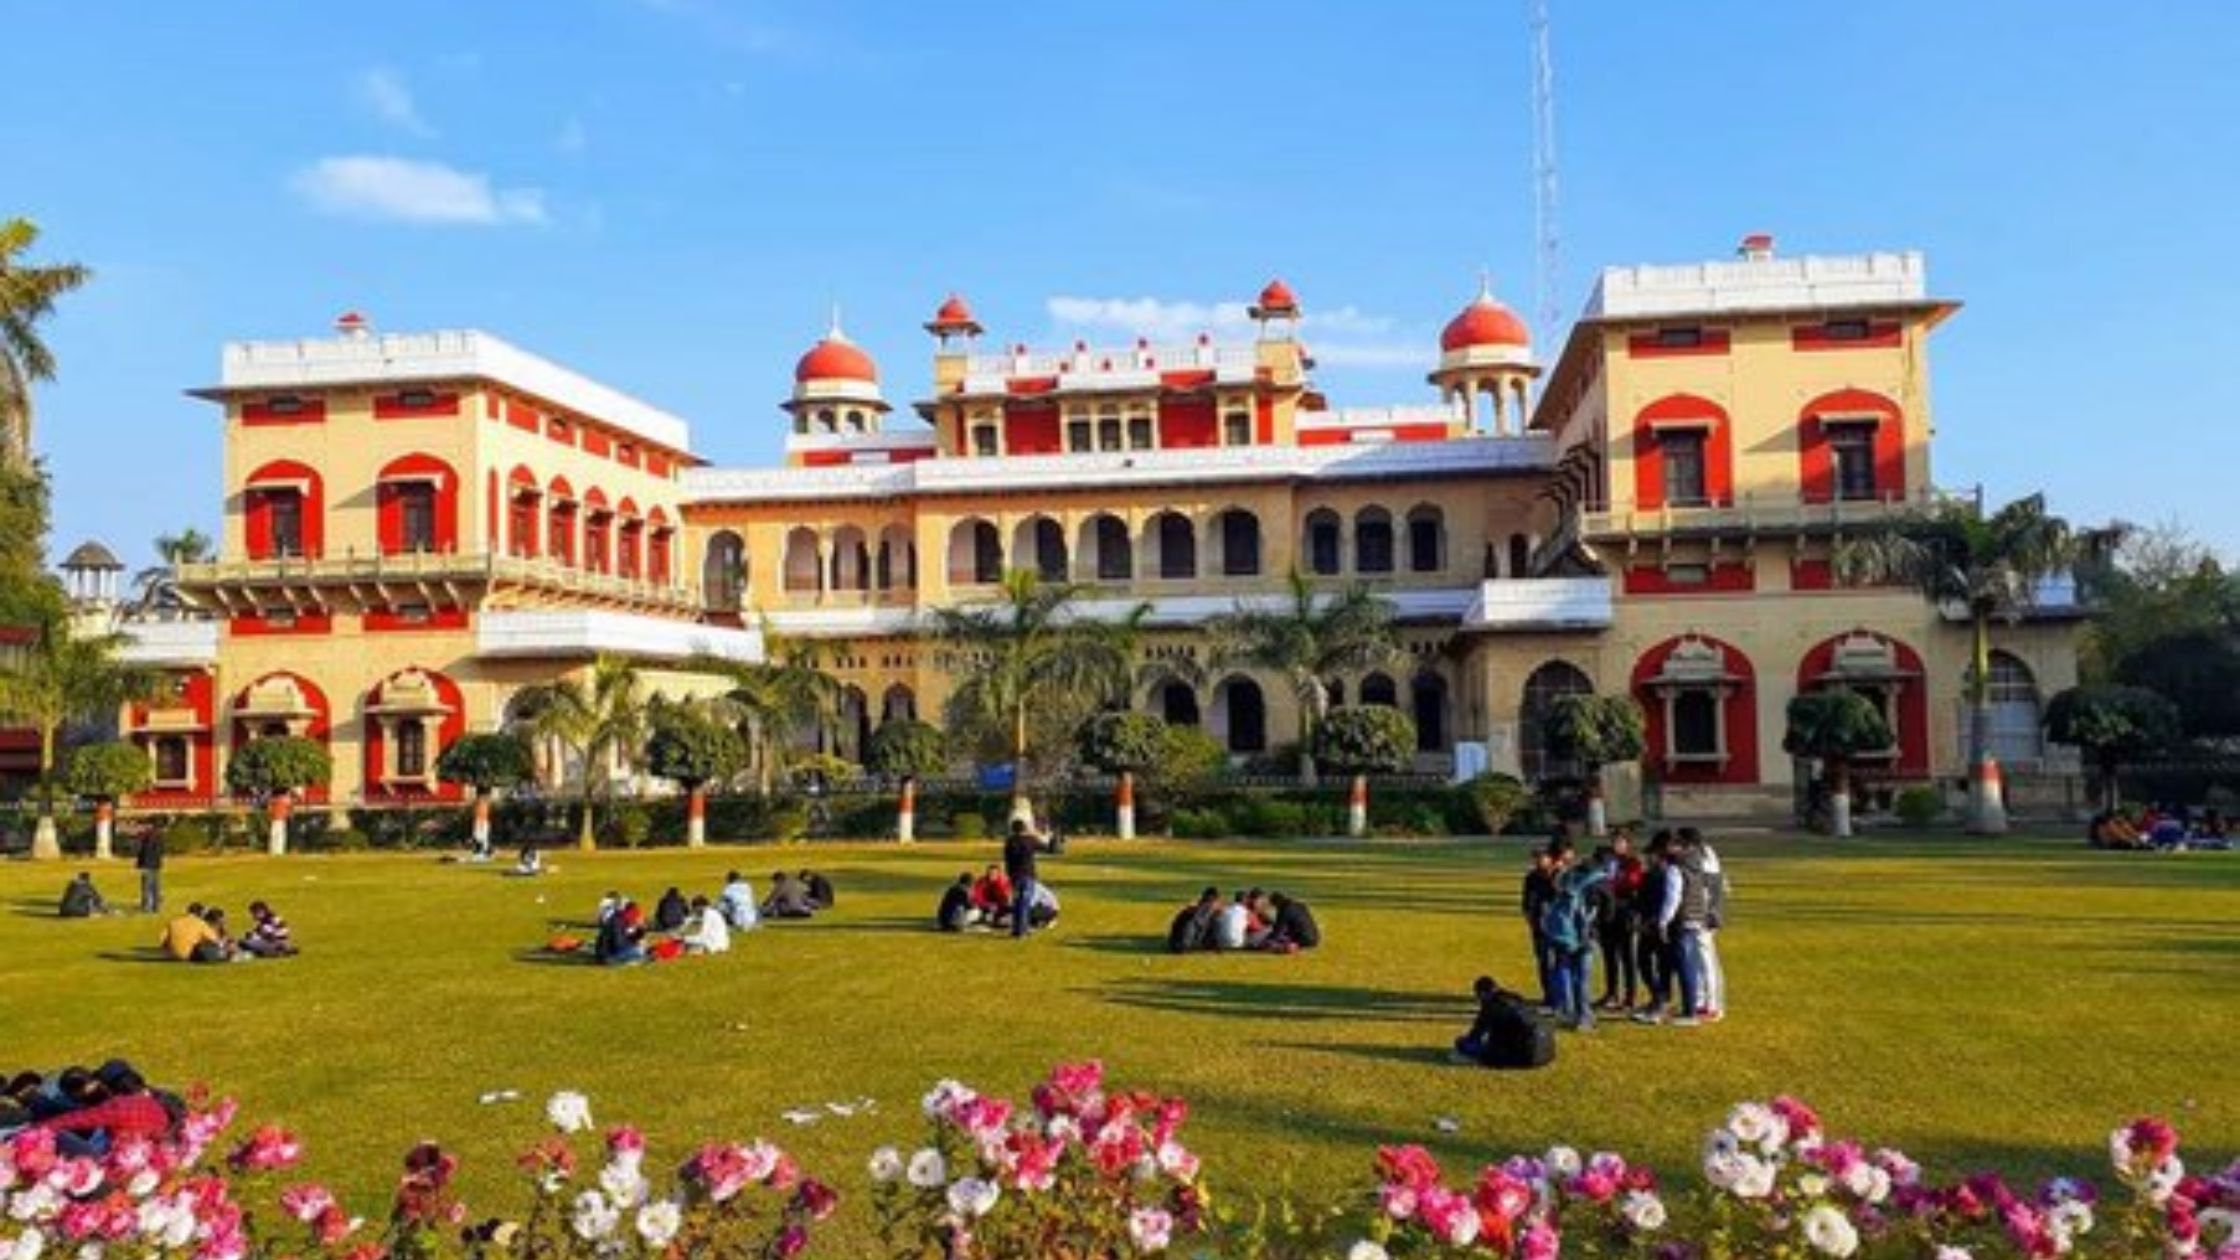 this university of bihar was built on the lines of london university